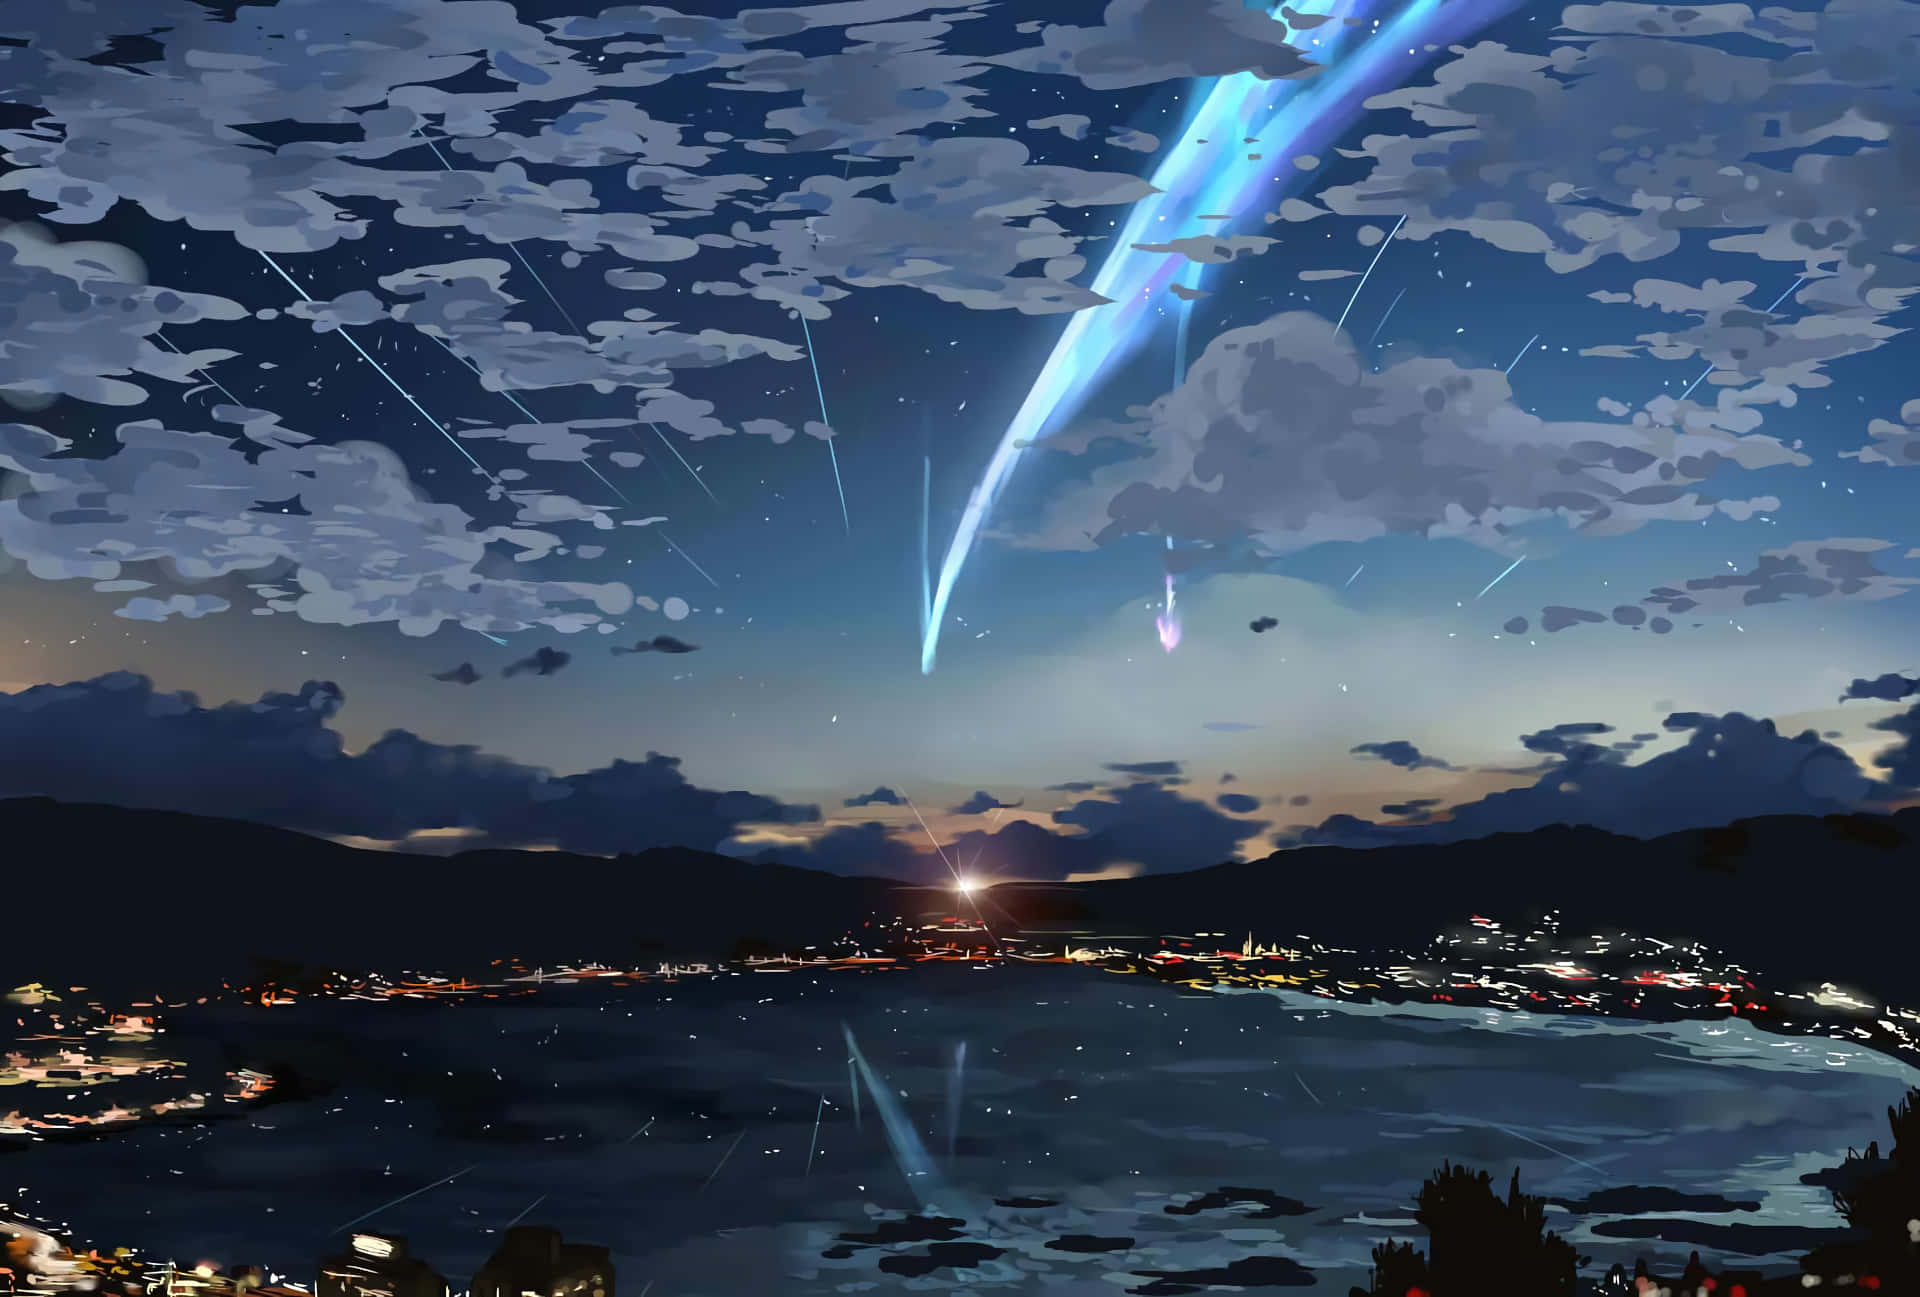 Enjoy the view of a beautiful Anime Sky